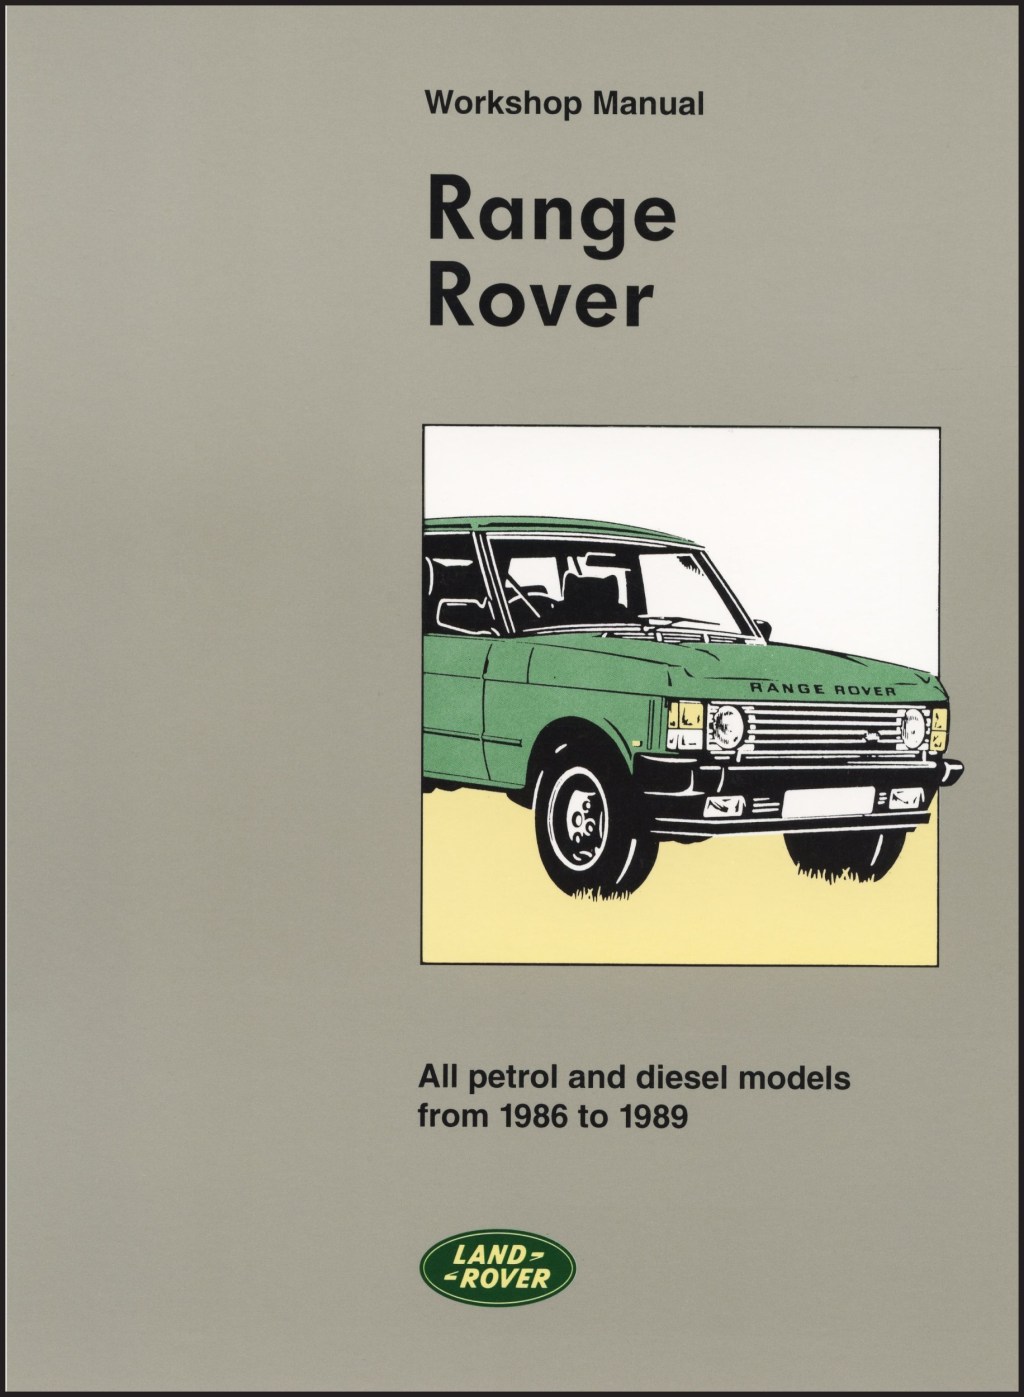 Picture of: Range Rover Workshop Manual: All Petrol and Diesel Models from  to   (Workshop Manuals)